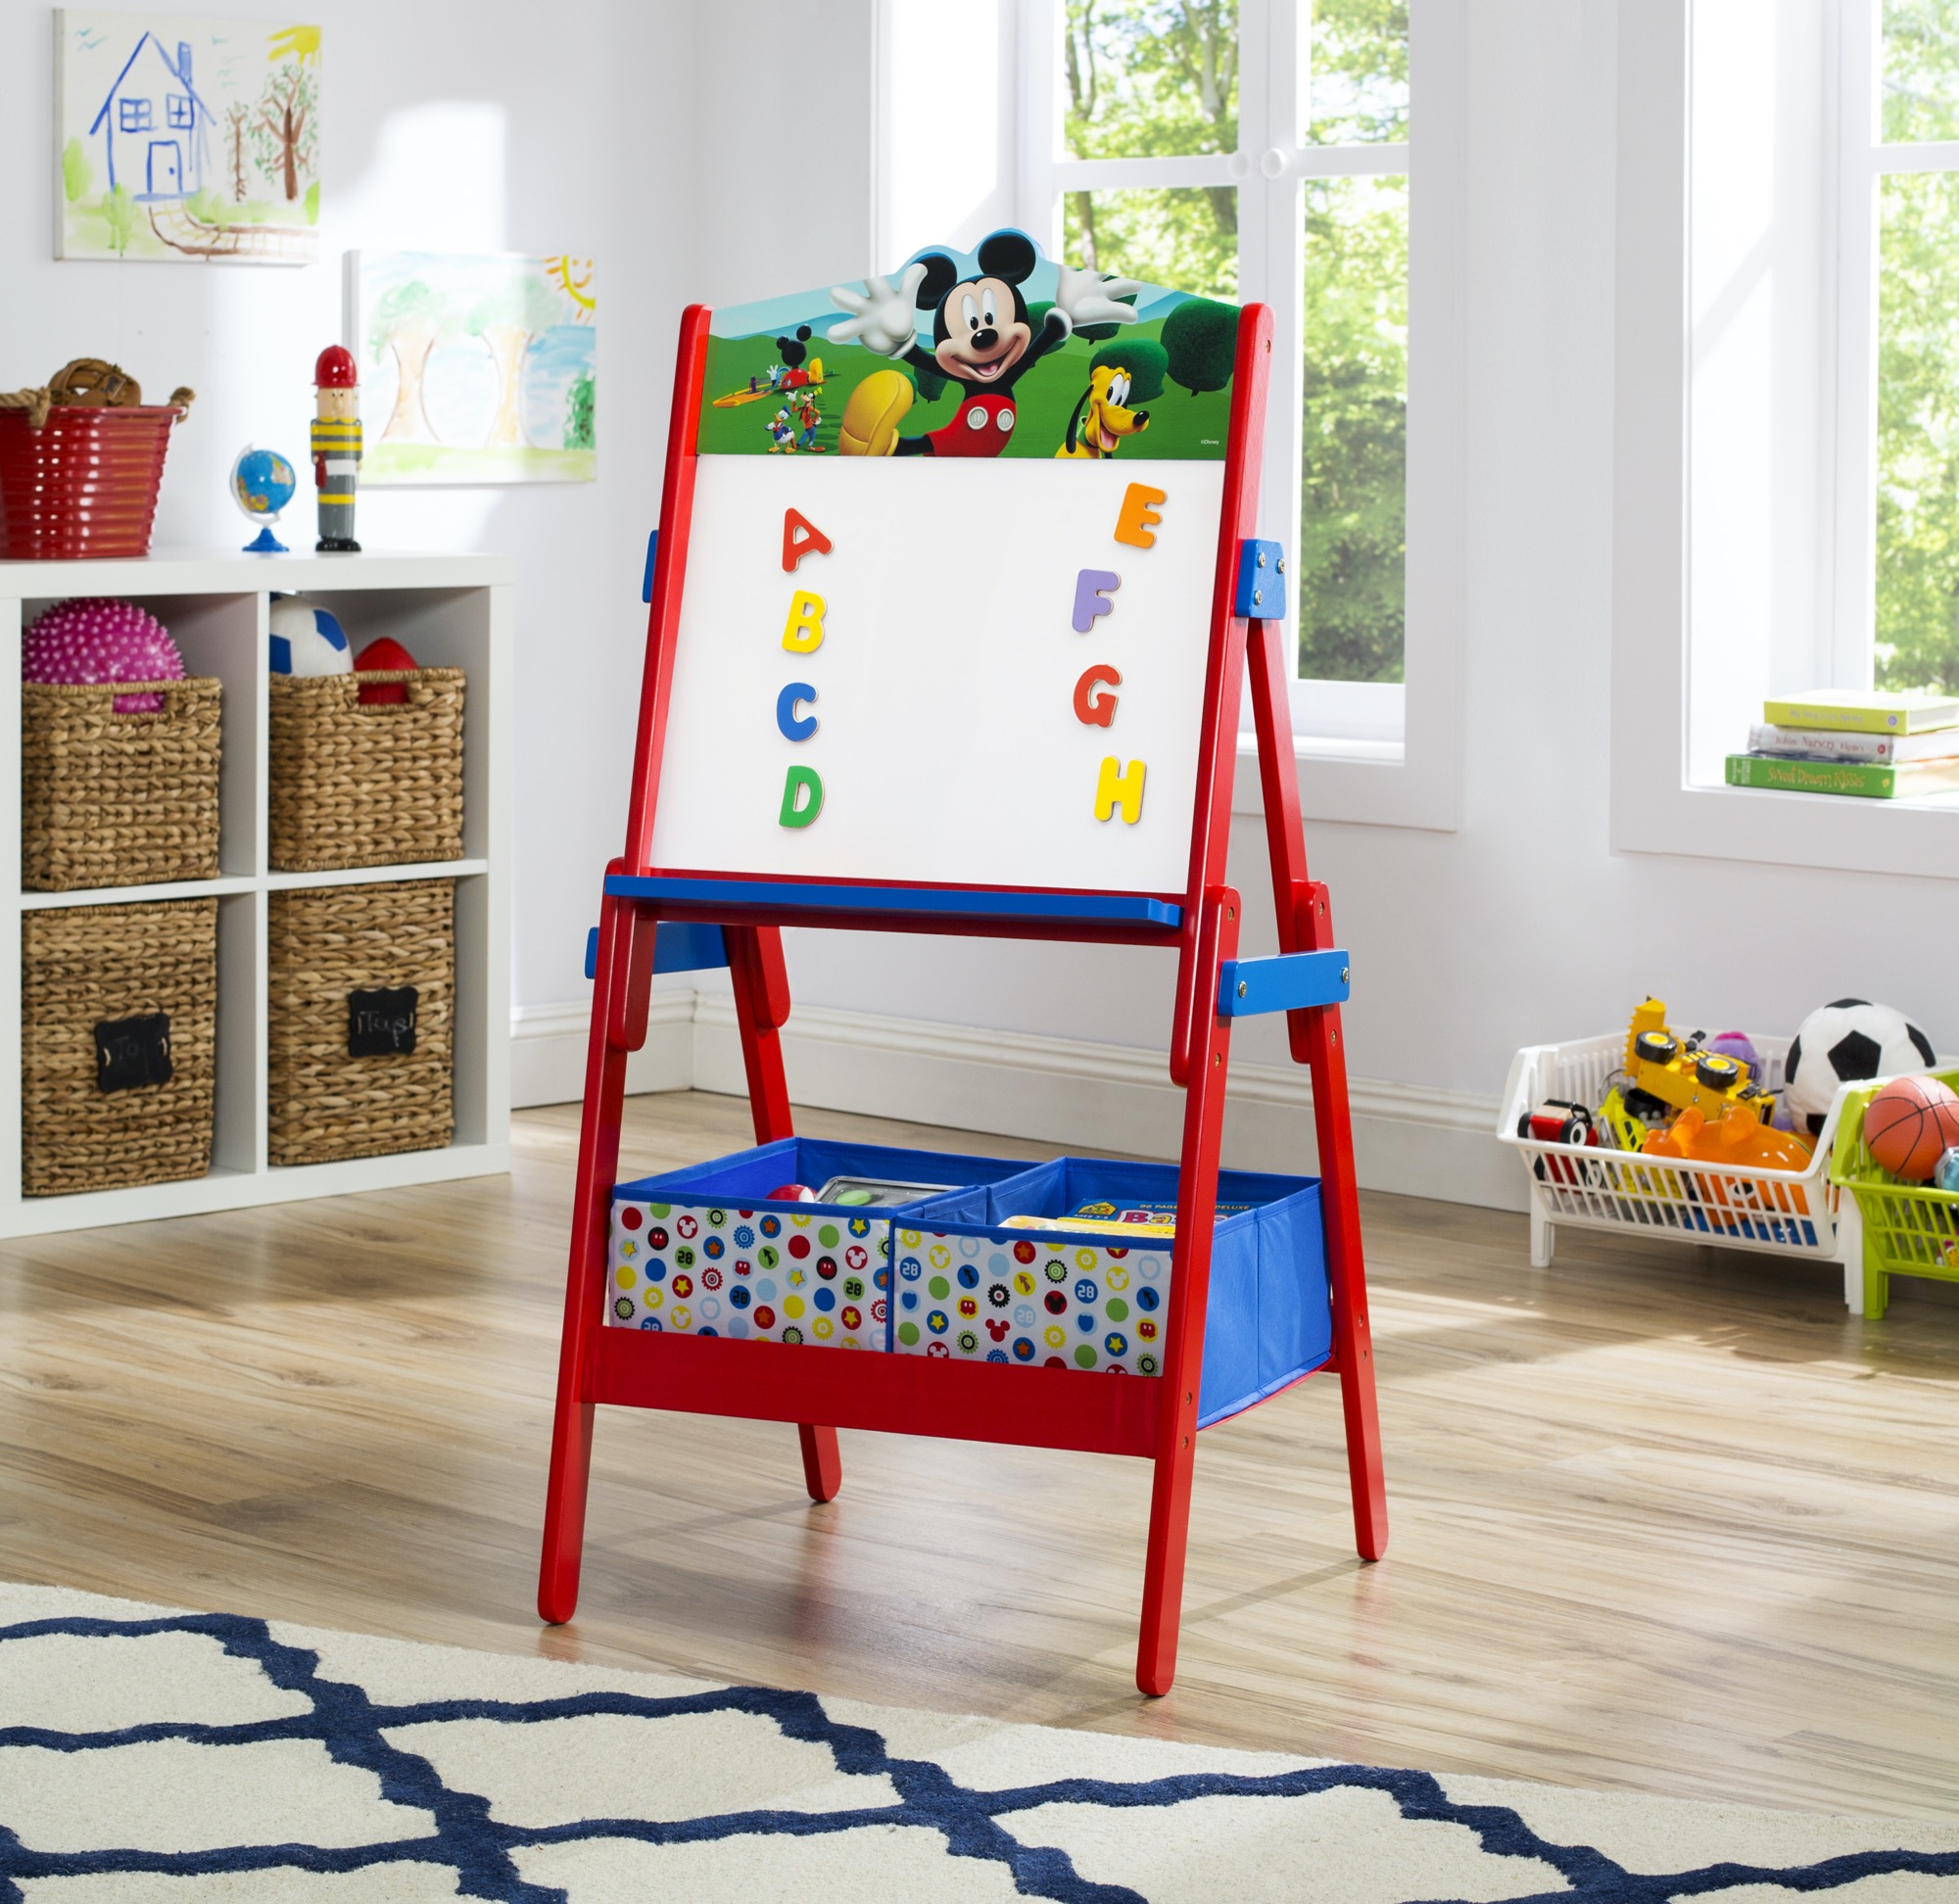 Disney Mickey Mouse Activity Easel with Storage by Delta Children, Greenguard Gold Certified - image 3 of 7